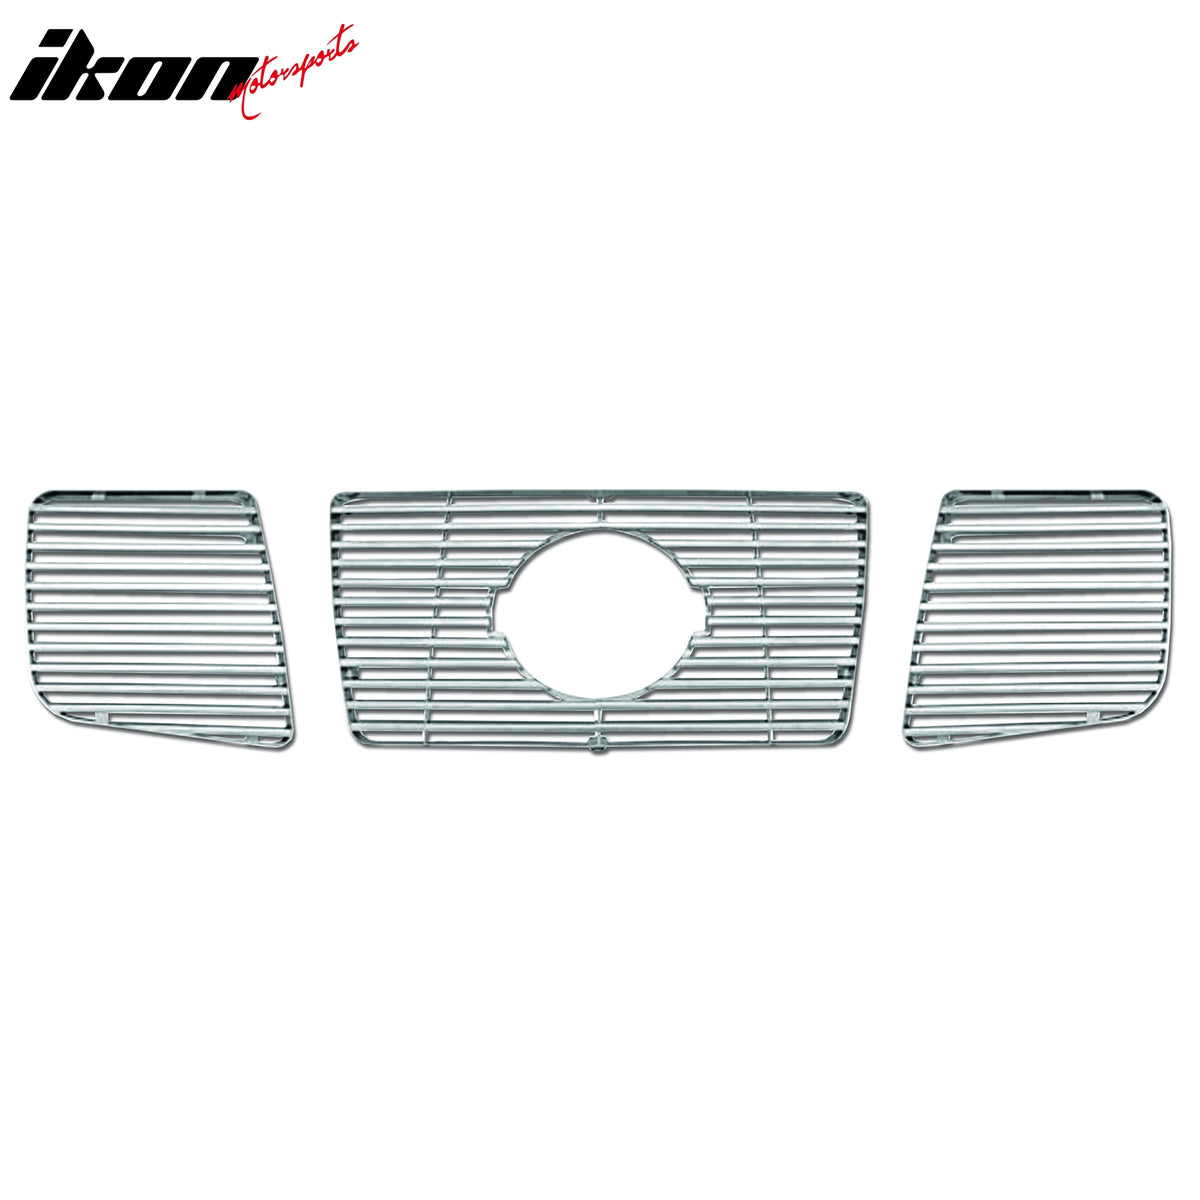 IKON MOTORSPORTS, Front Bumepr Grille Compatible With 2004-2007 Nissan Titan SE & LE, ABS Plastic Chrome Front Bumper Upper Hood Grille Insert Assembly Replacement Set of 3PCS